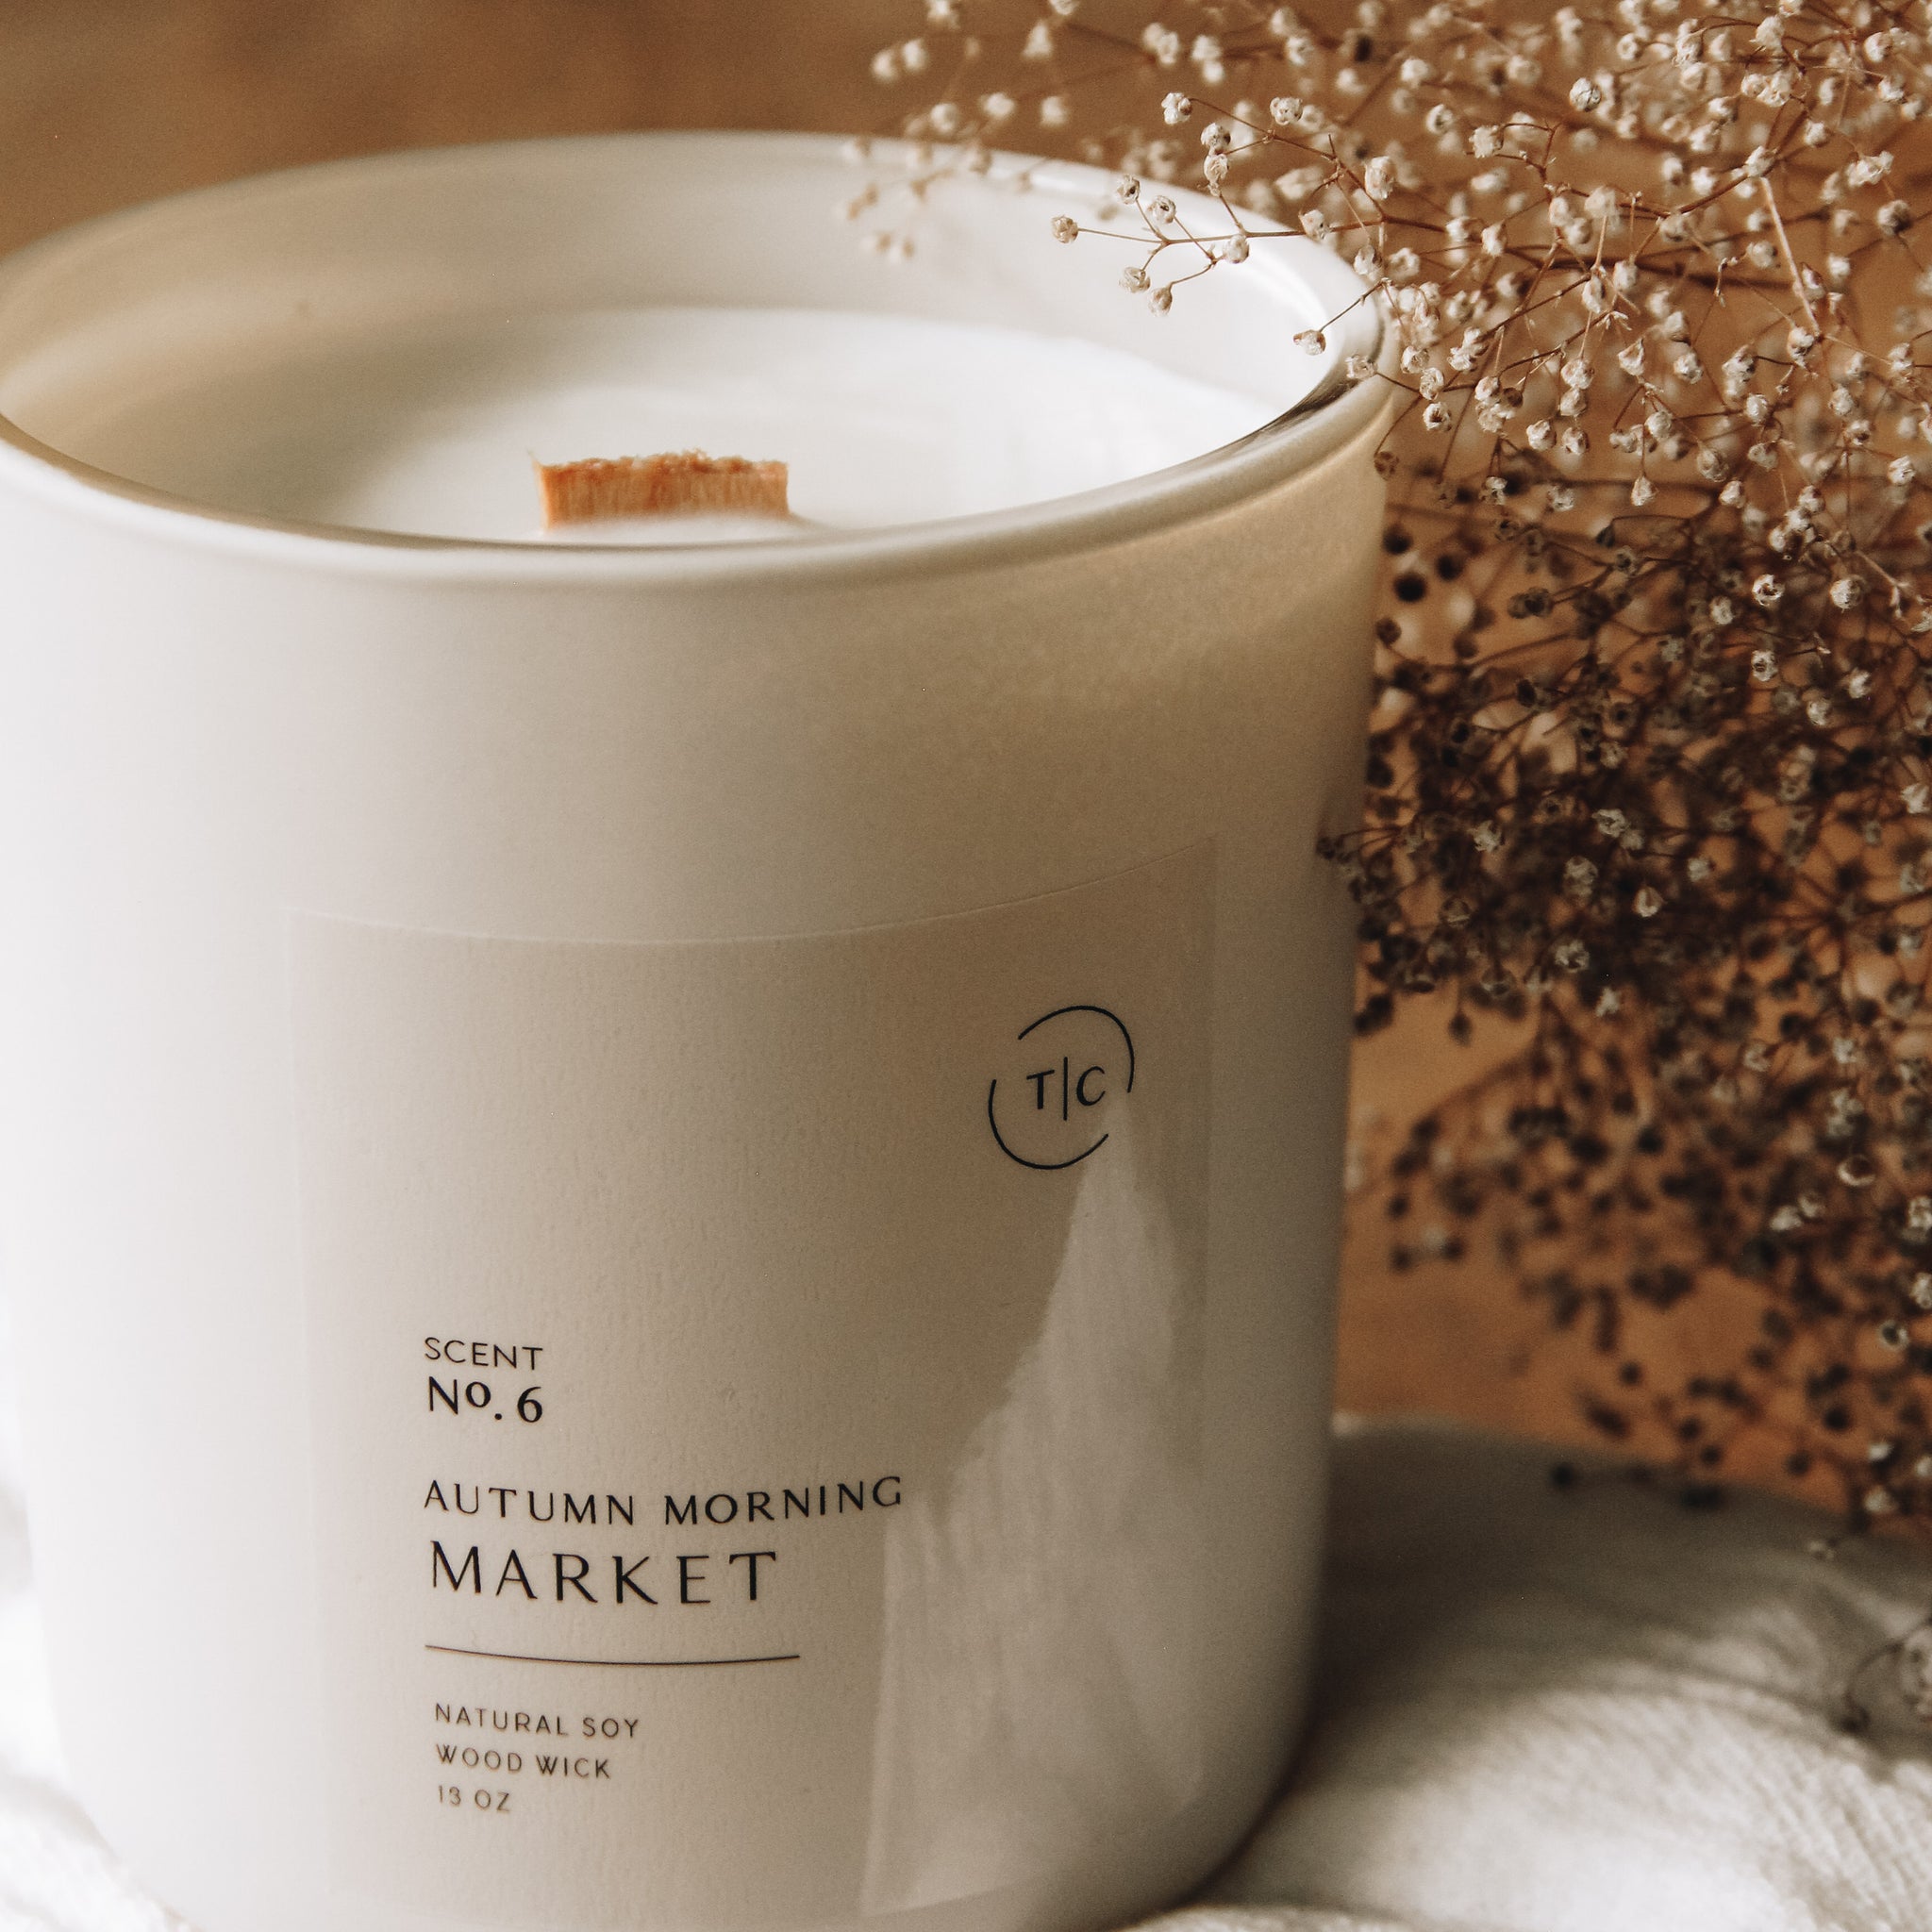 The Chandlerie's Autumn Morning Market  - a soy wax, wood wick candle in cream glass vessel